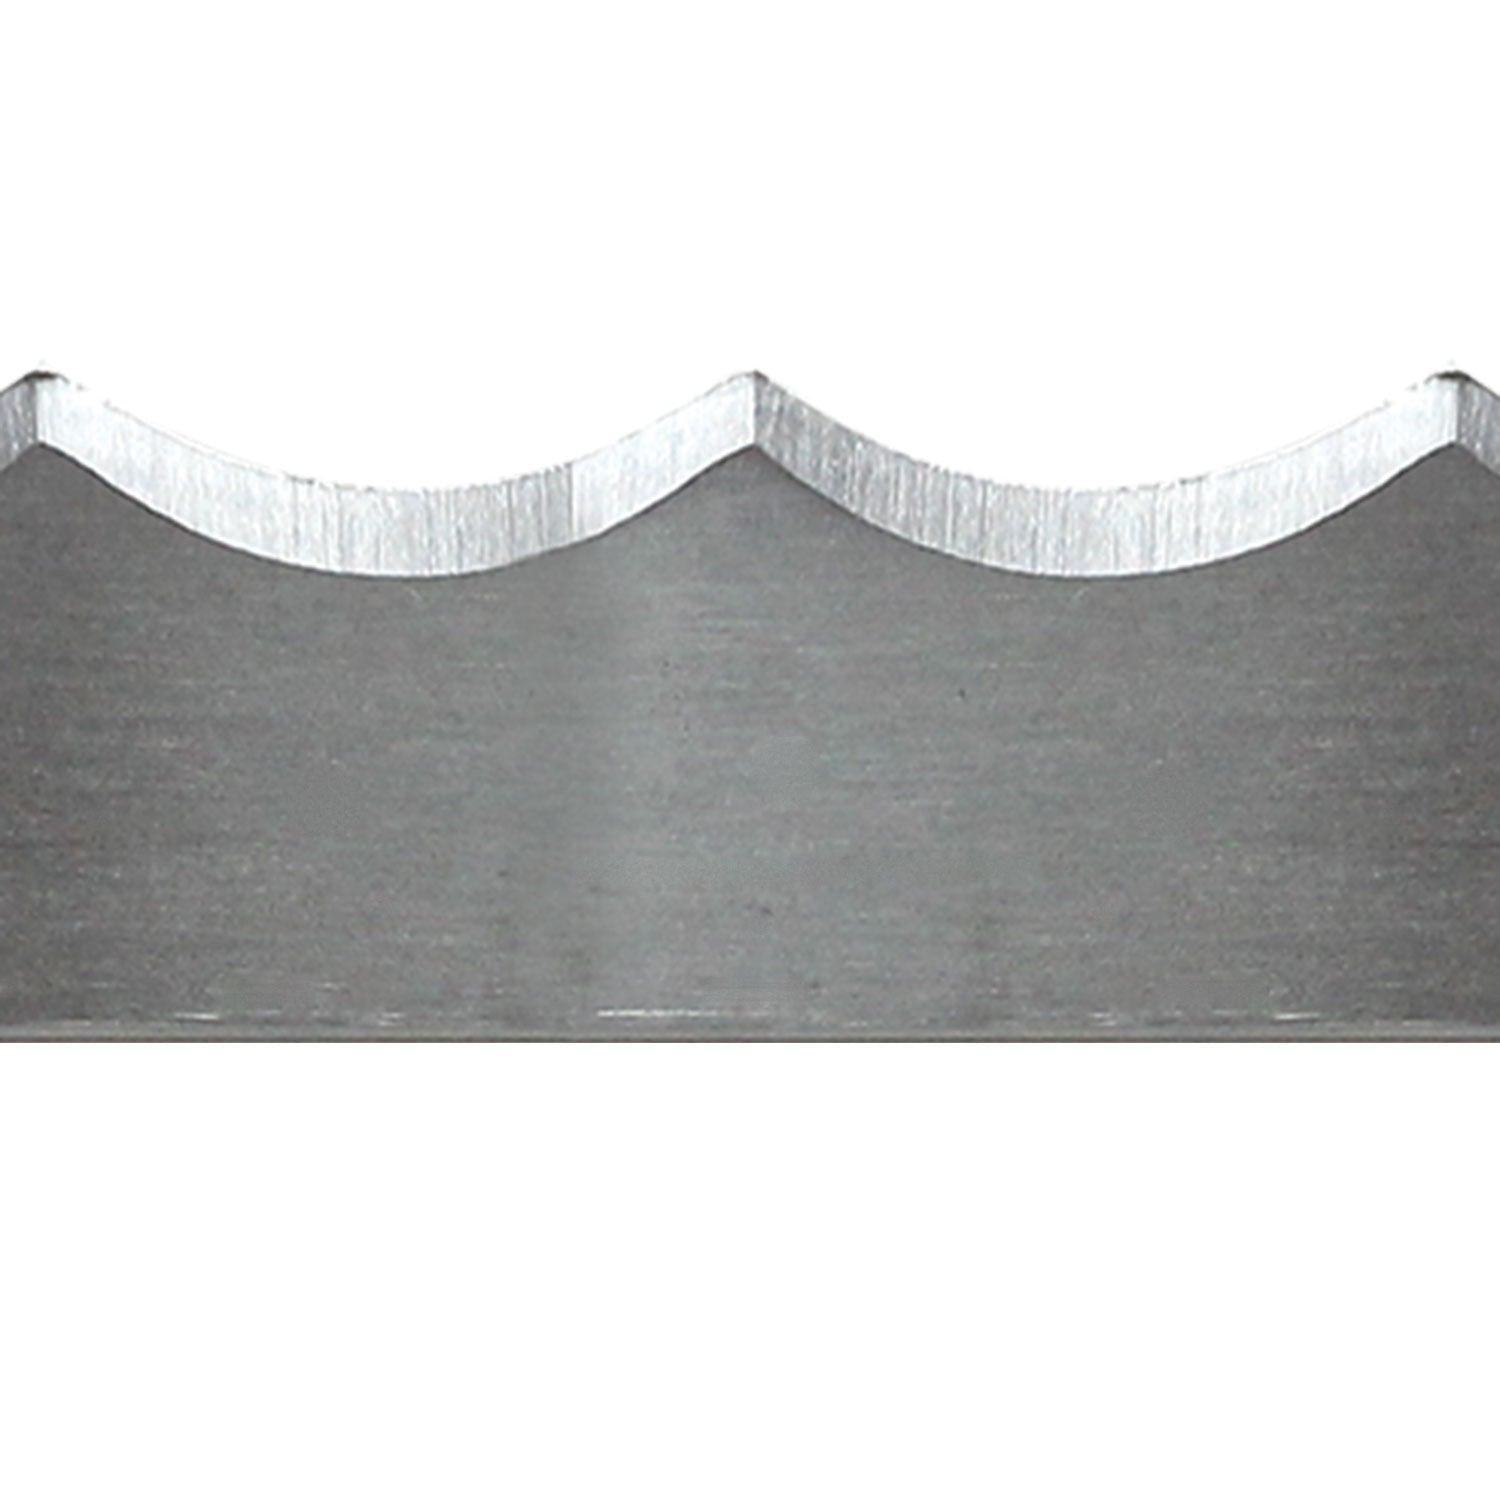 Meat Band Saw Blade - Scallop Edge - 128 in. x 5/8 in. x .022 in. - Pack of 4